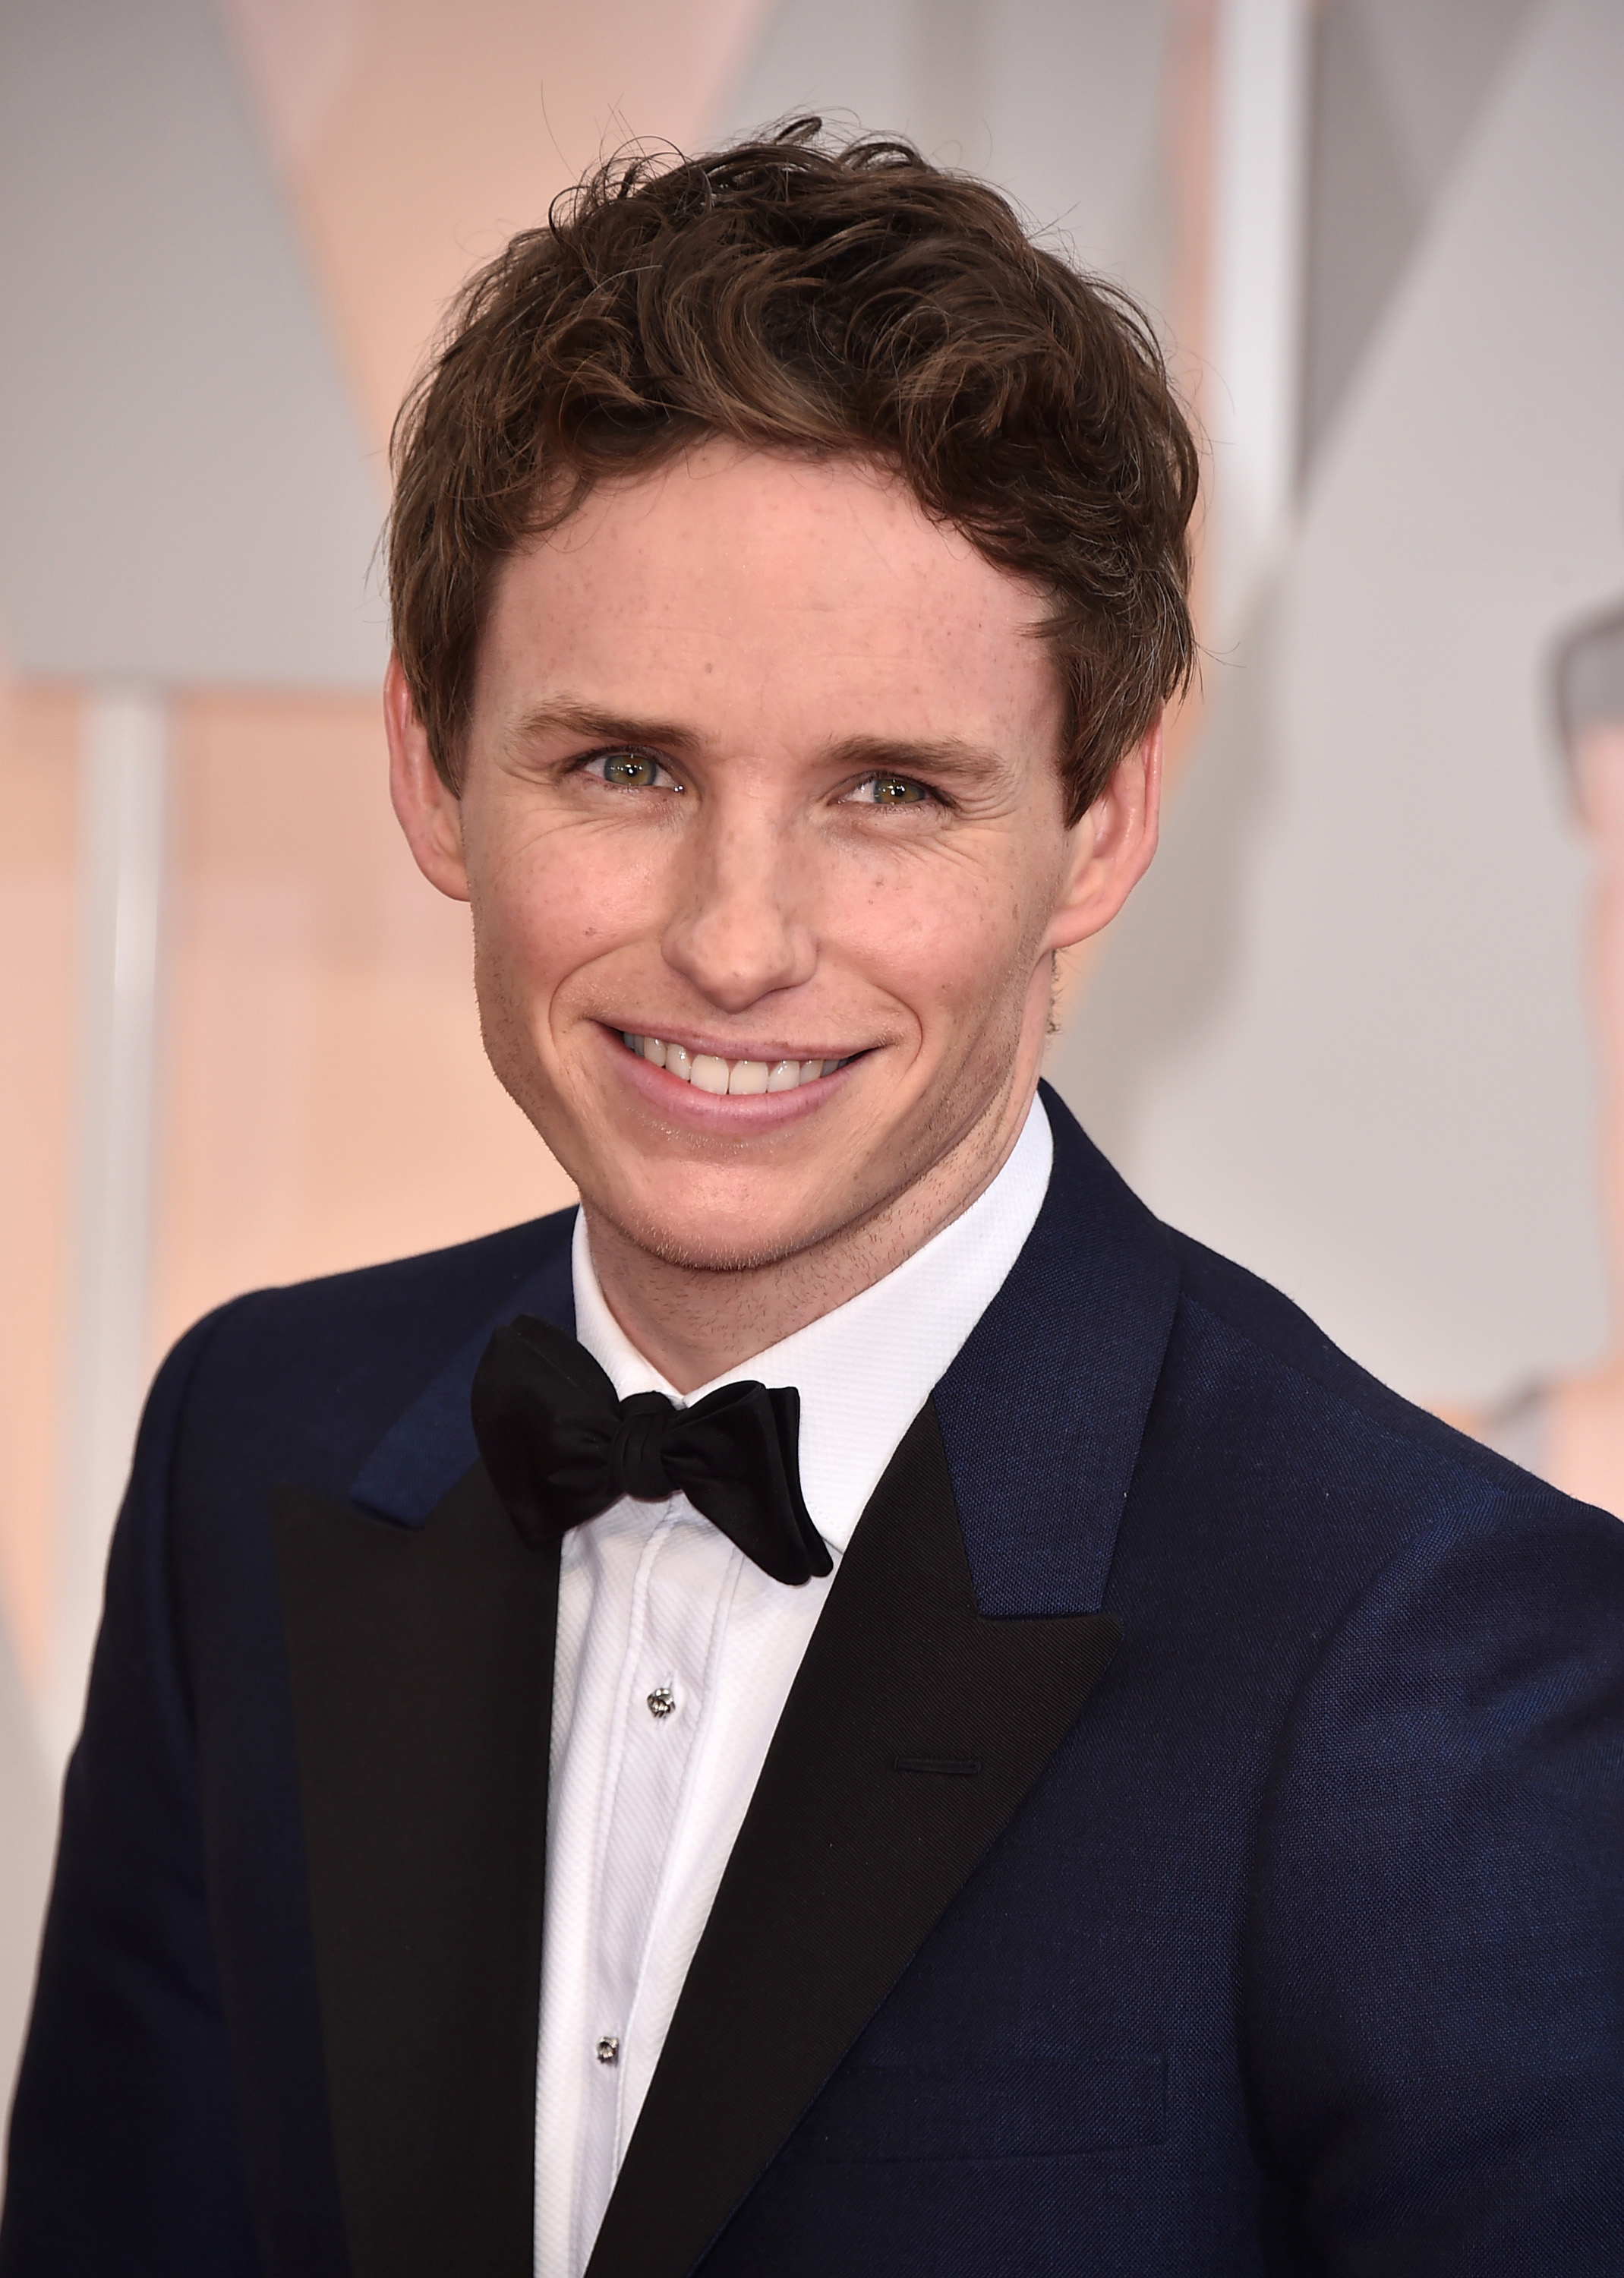 Eddie Redmayne arrives at the Oscars on Sunday, Feb. 22, 2015, at the Dolby Theatre in Los Angeles. (Jordan Strauss—Invision/AP)